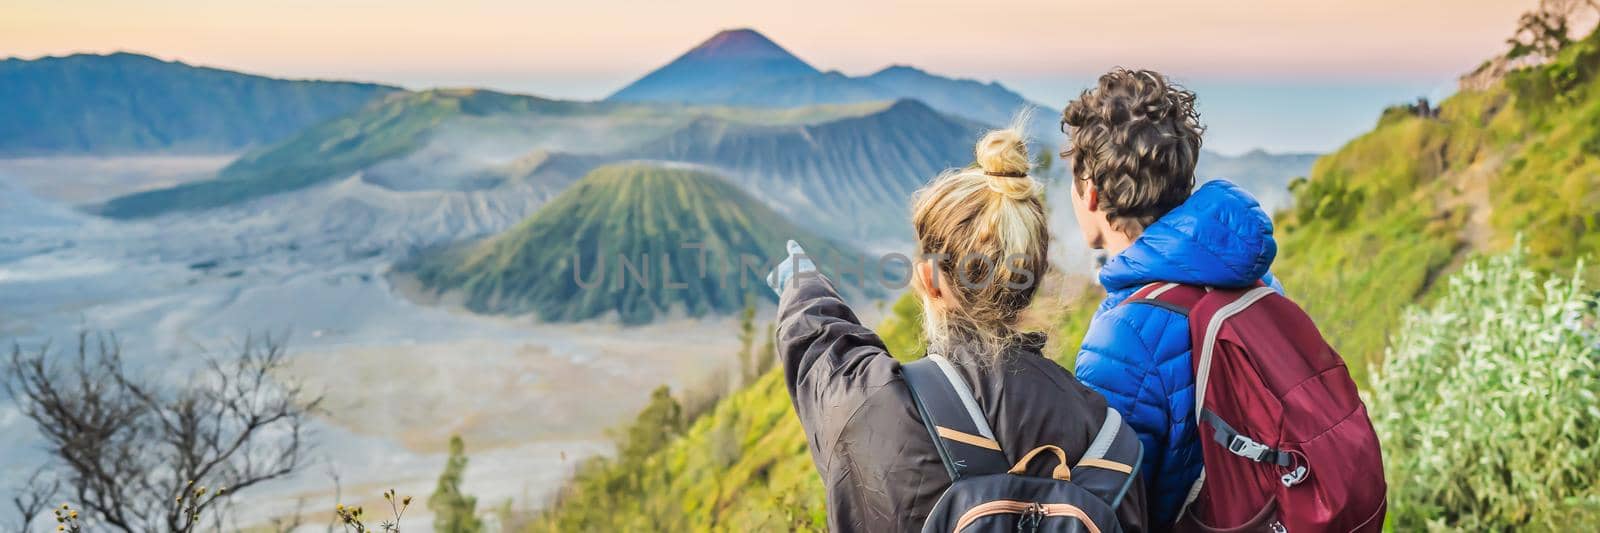 BANNER, LONG FORMAT Young couple man and woman meet the sunrise at the Bromo Tengger Semeru National Park on the Java Island, Indonesia. They enjoy magnificent view on the Bromo or Gunung Bromo on Indonesian, Semeru and other volcanoes located inside of the Sea of Sand within the Tengger Caldera. One of the most famous volcanic objects in the world. Travel to Indonesia concept by galitskaya